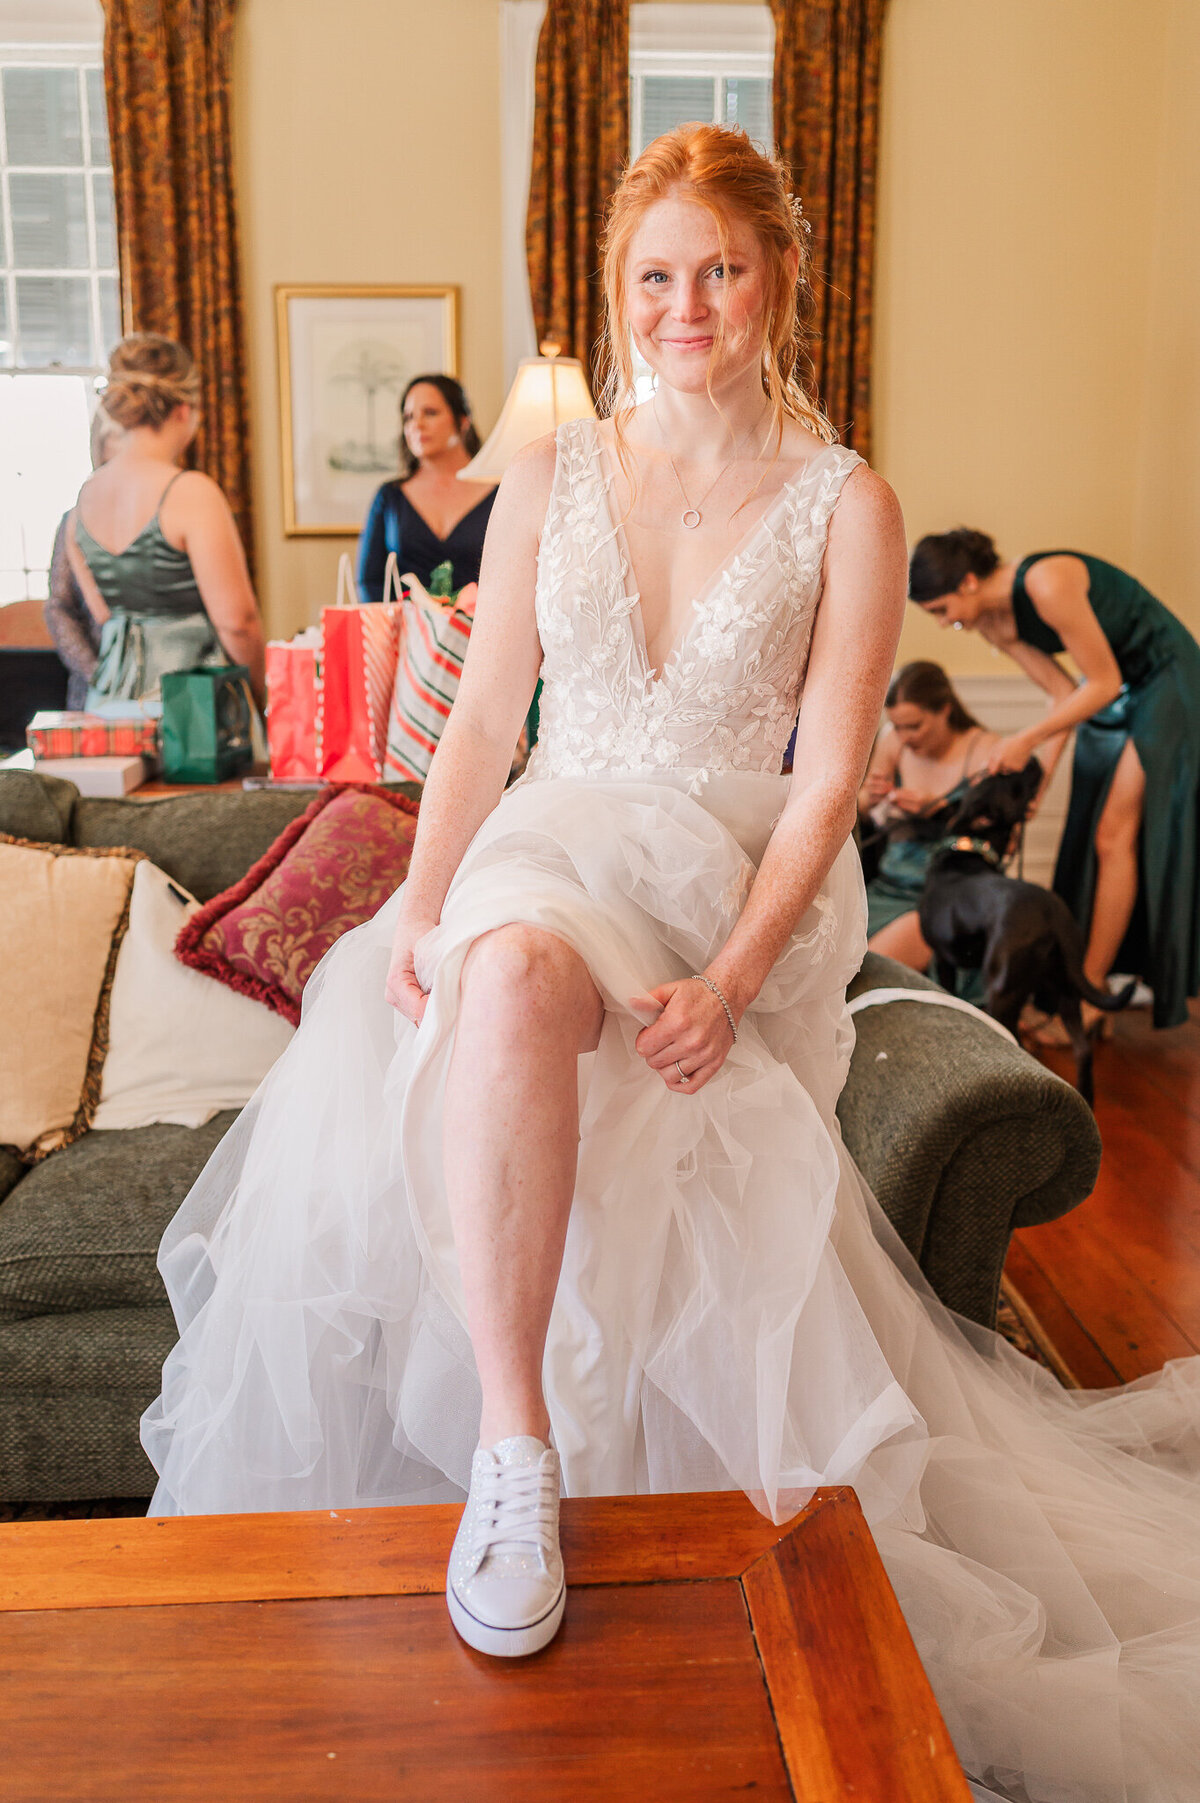 A bride getting ready on her wedding day showing off a pair of custom shoes enjoying her North Carolina wedding photography